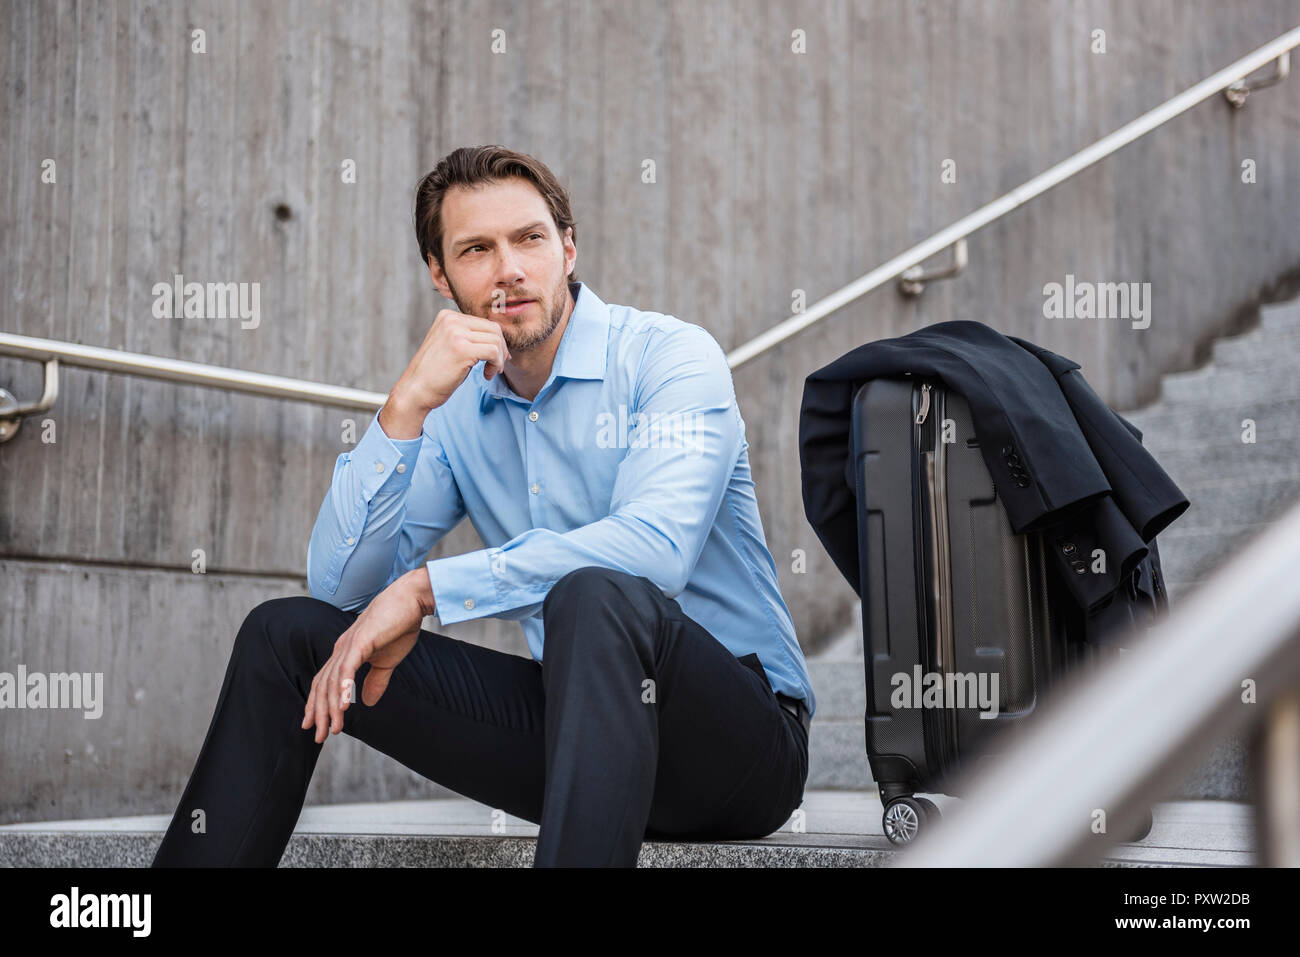 Businessman with rolling suitcase sitting on stairs Banque D'Images